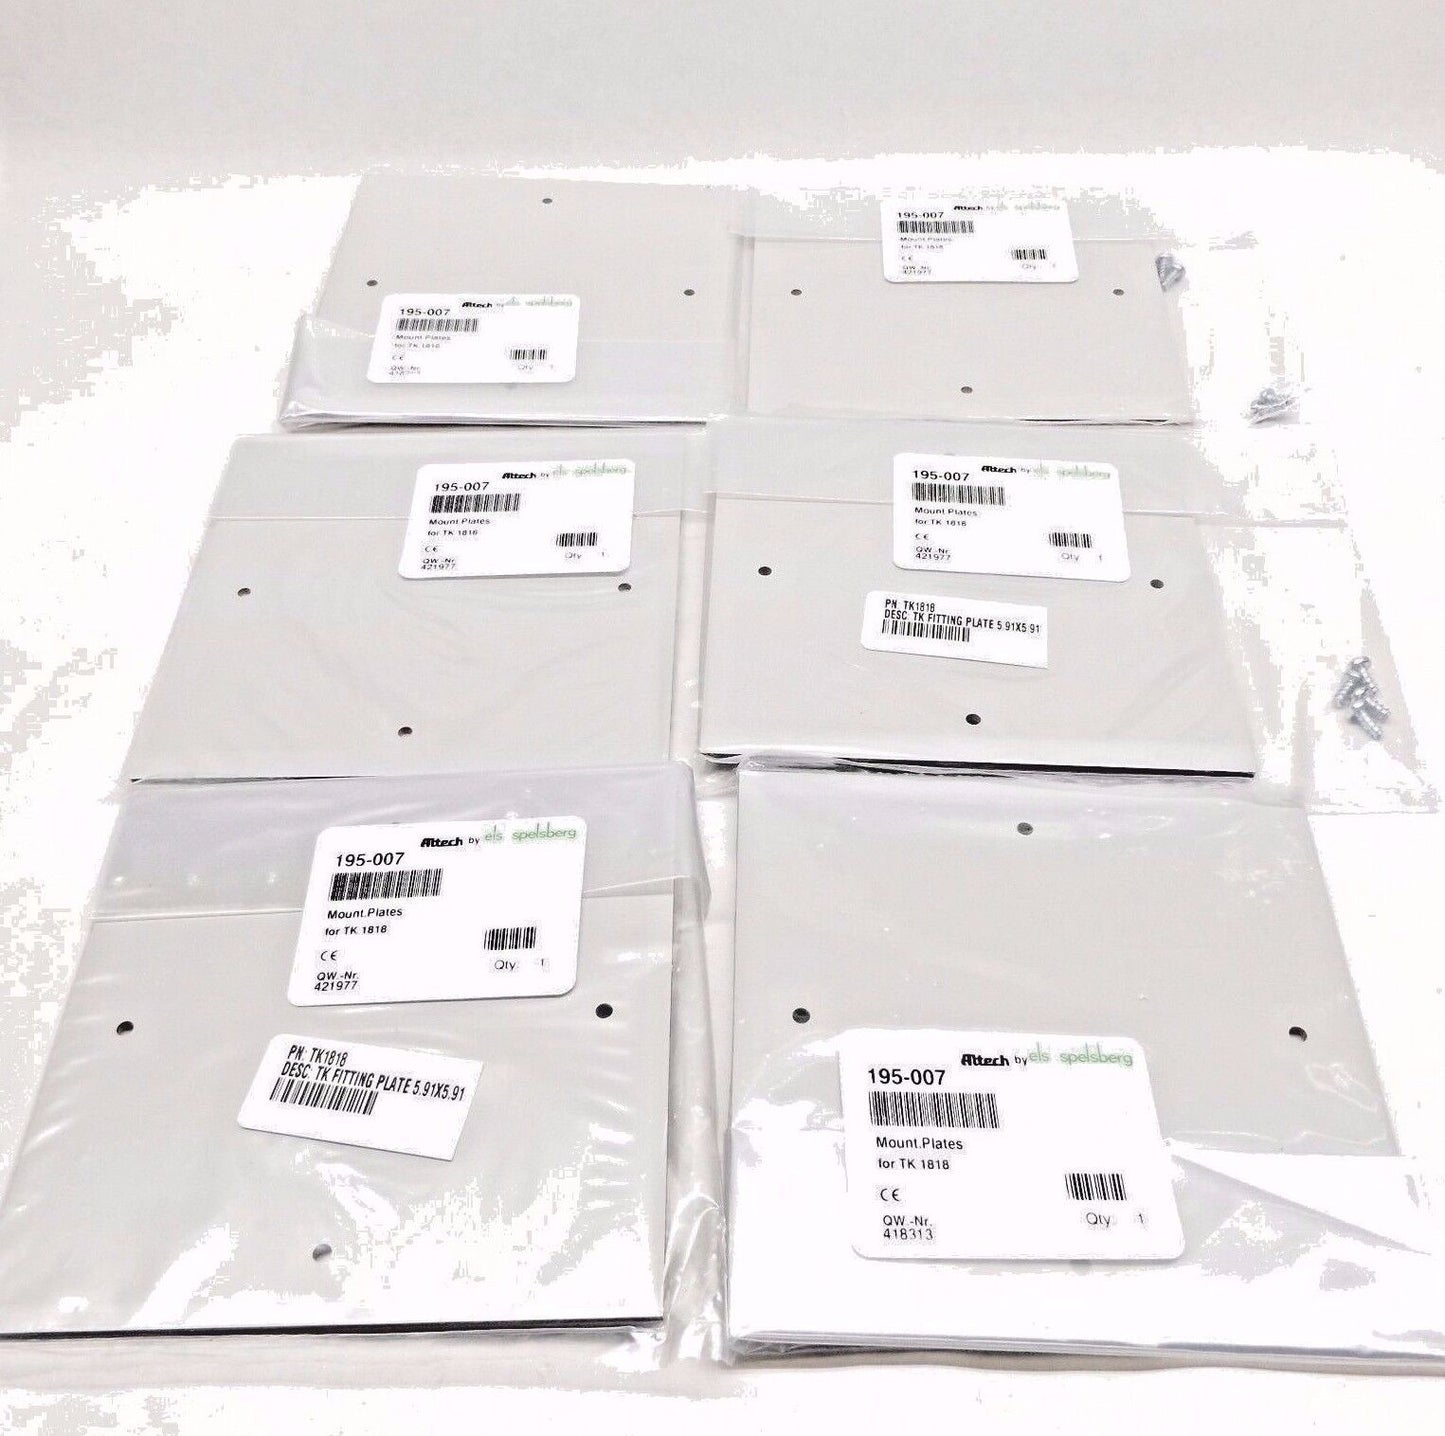 LOT OF 6 ALTECH 195-007 MOUNTING PLATE FOR TK1818 SERIES 150 X 150MM